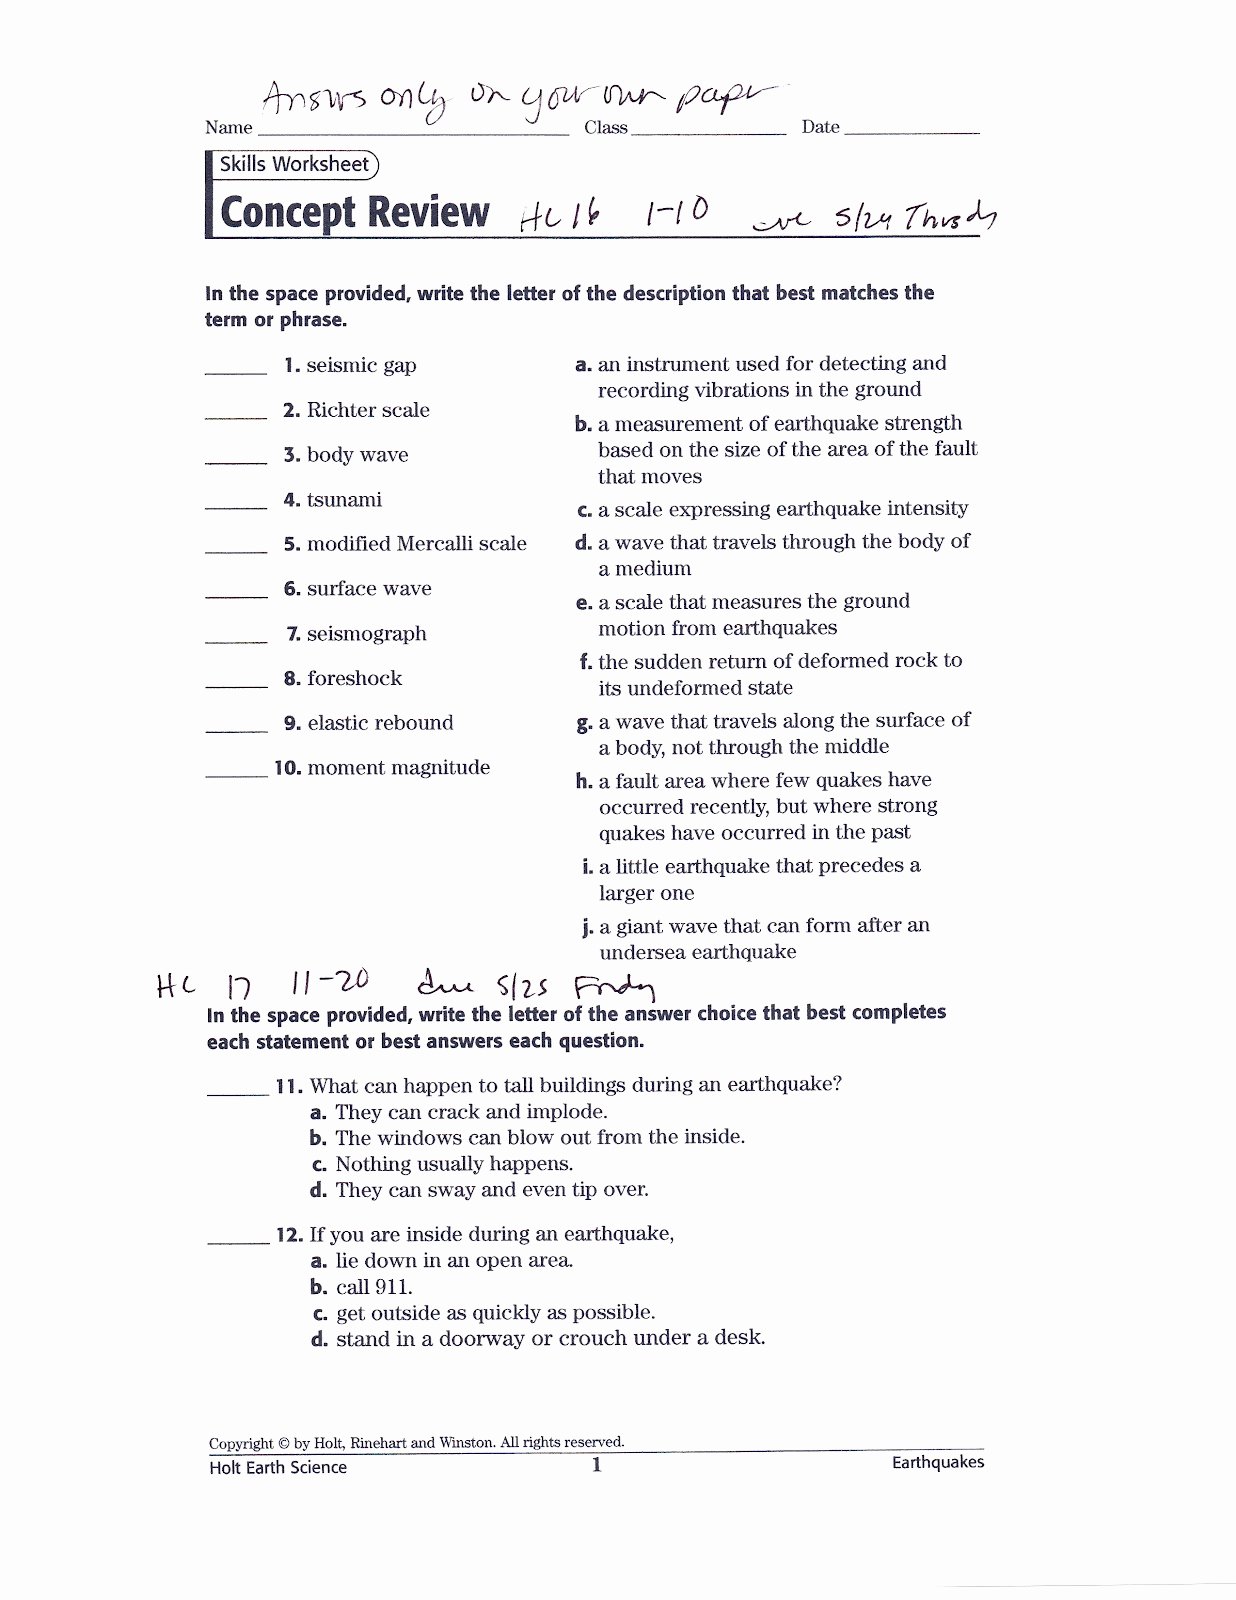 Waves Review Worksheet Answer Key Luxury Note Taking Worksheet Earthquakes Section 1 Answers